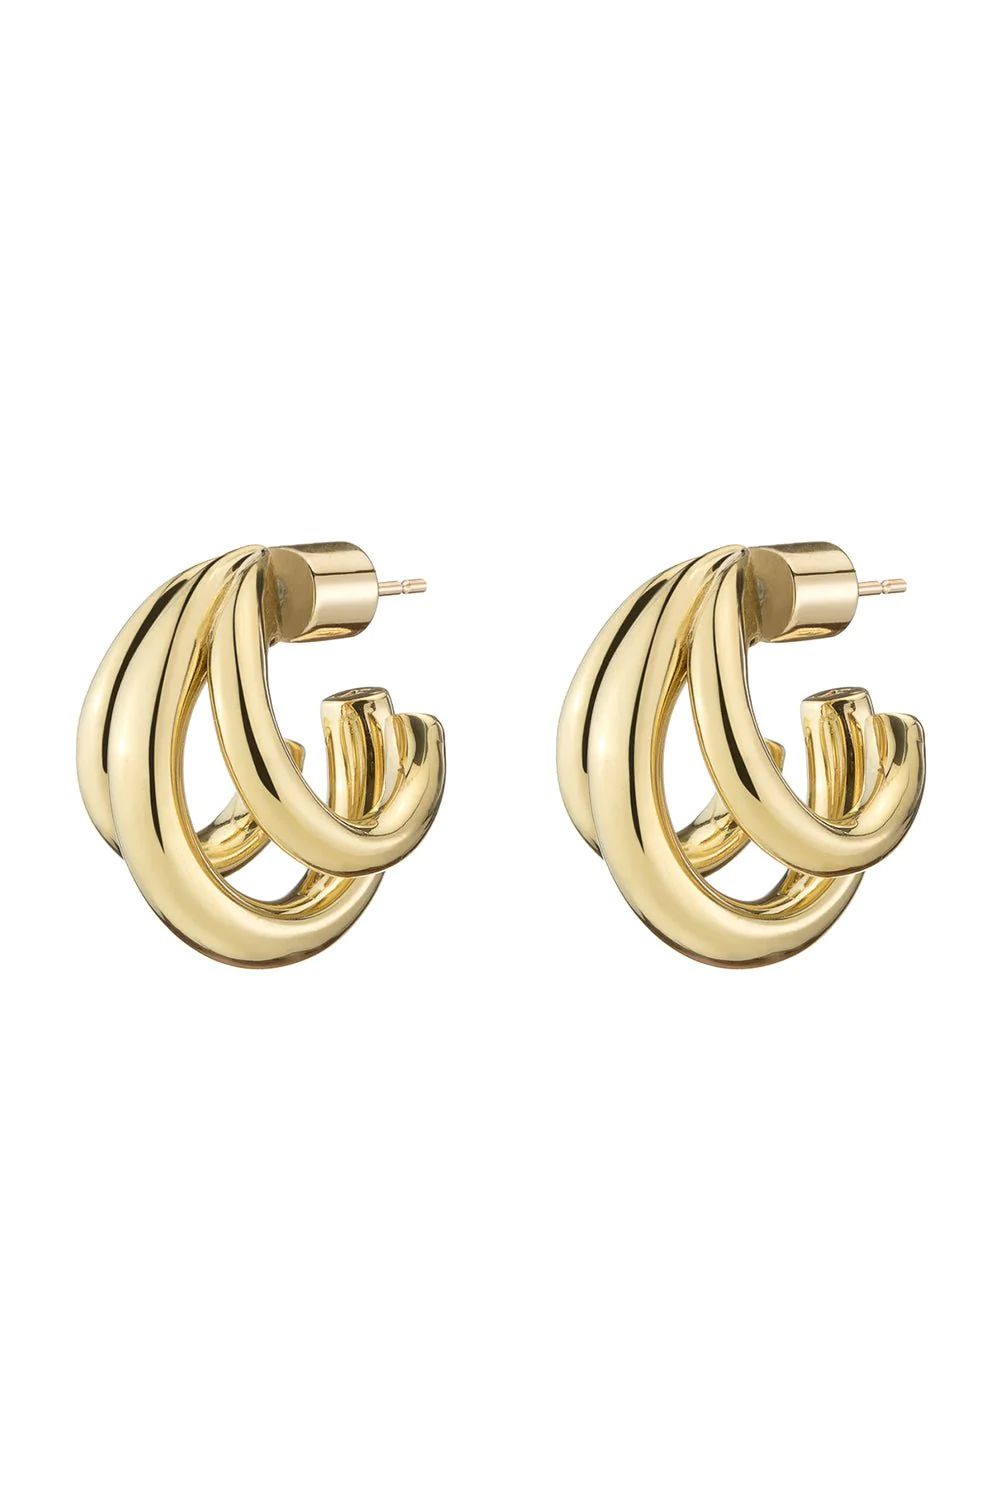 Triple Lilly Micro Huggie Earrings | Marissa Collections